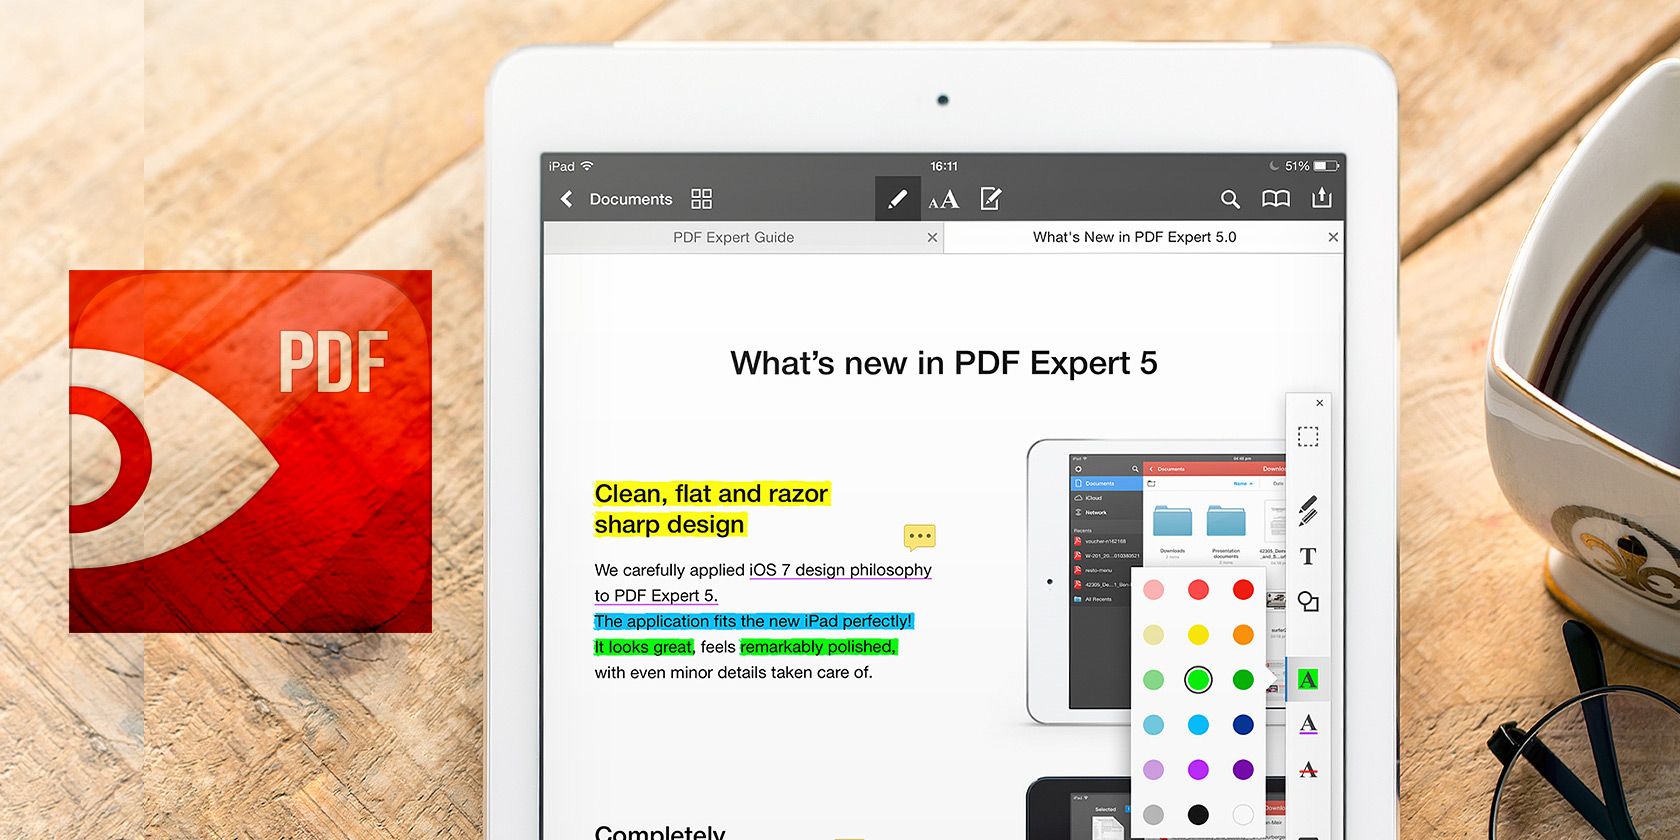 View & Edit PDF Files On Your iPad With PDF Expert 5